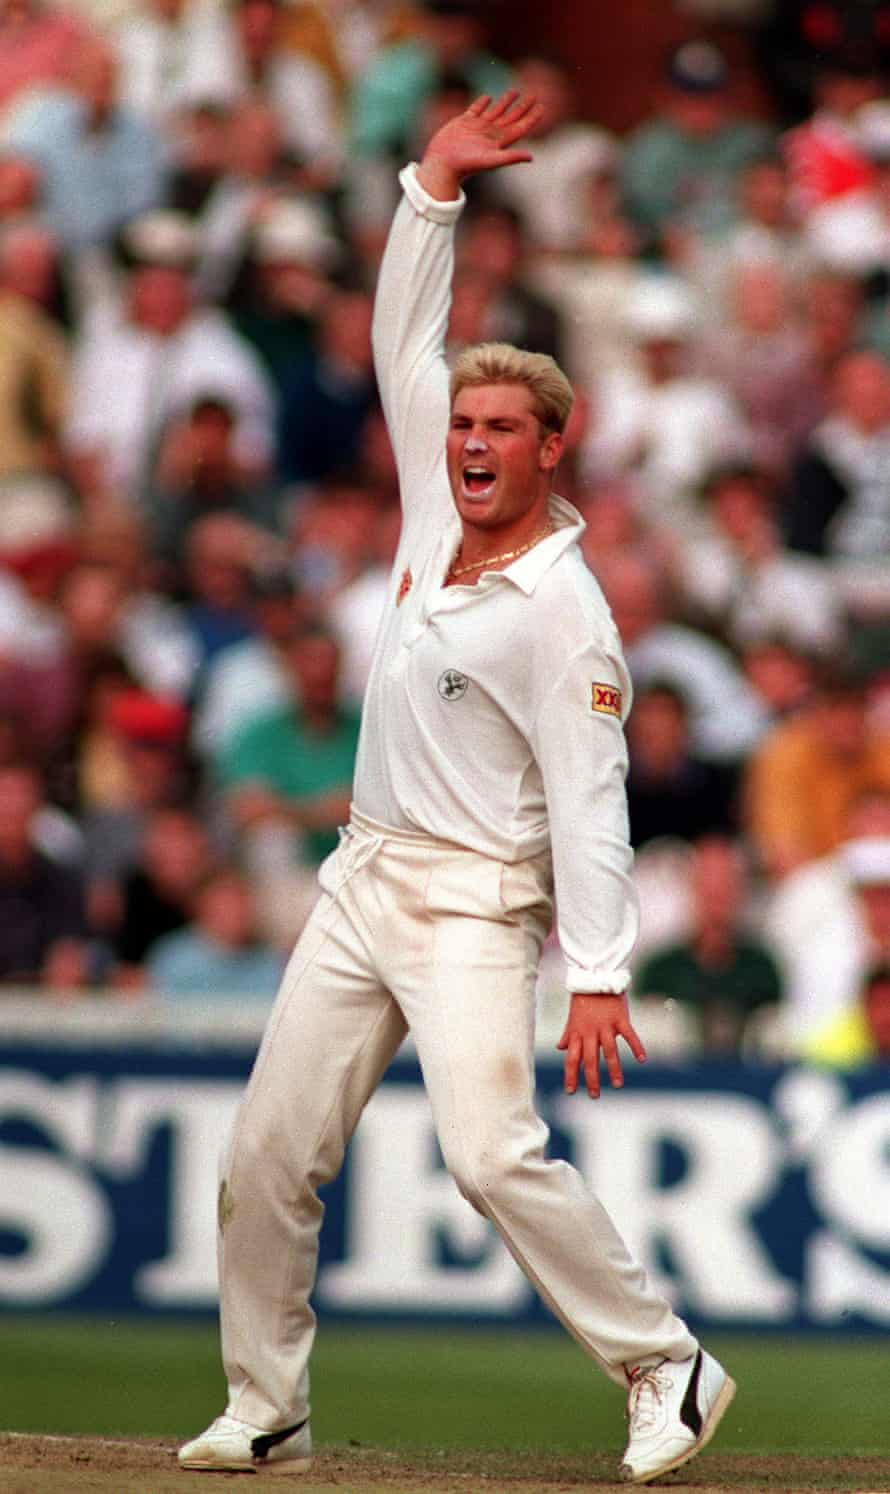 Shane Warne in action in the same Test.